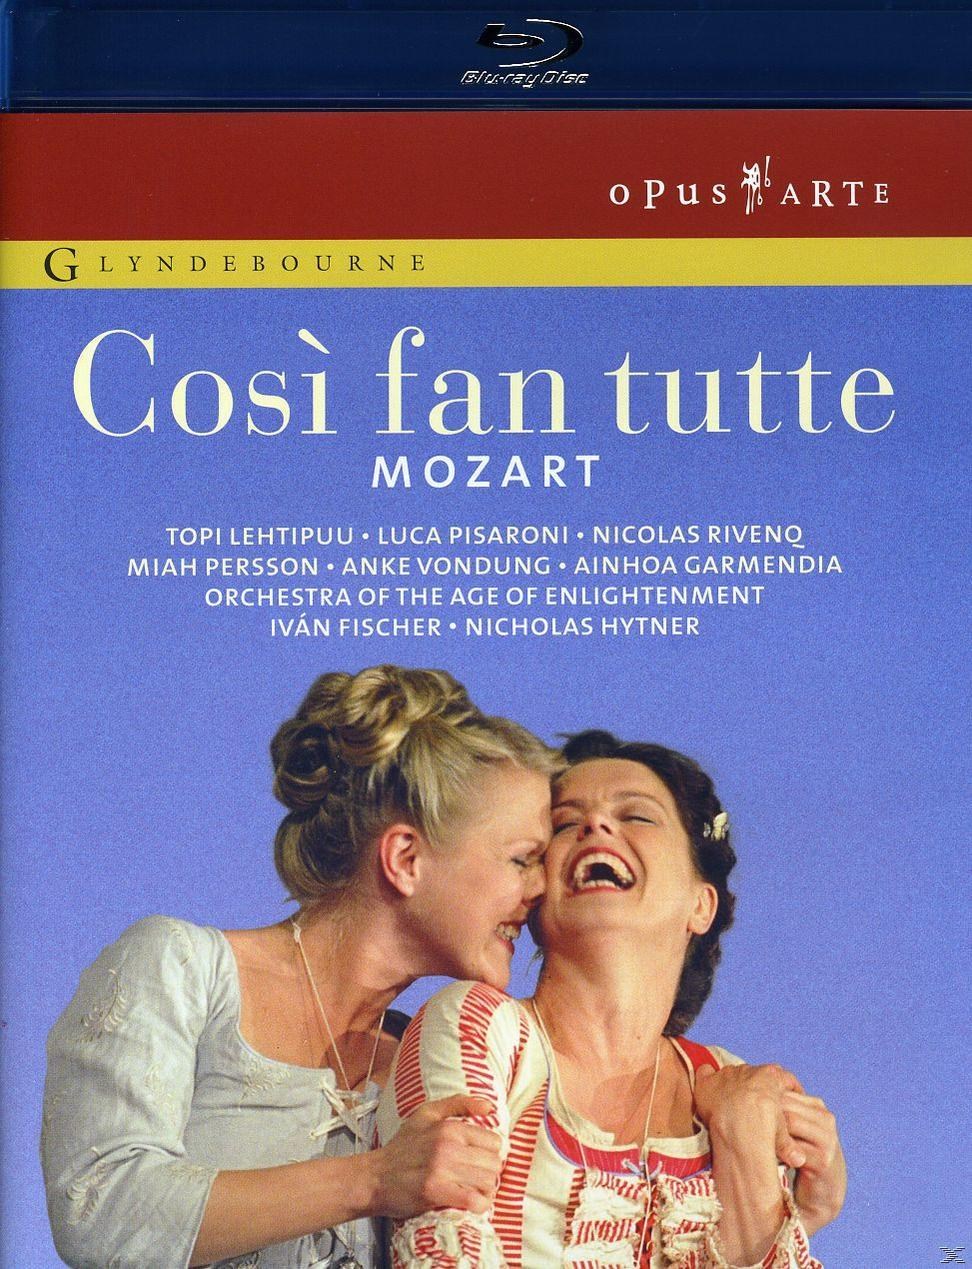 Enlightenment, Glyndenbourne Age Orchestra Of The The Tutte Of - VARIOUS, Chorus Fan - Cosi (Blu-ray)